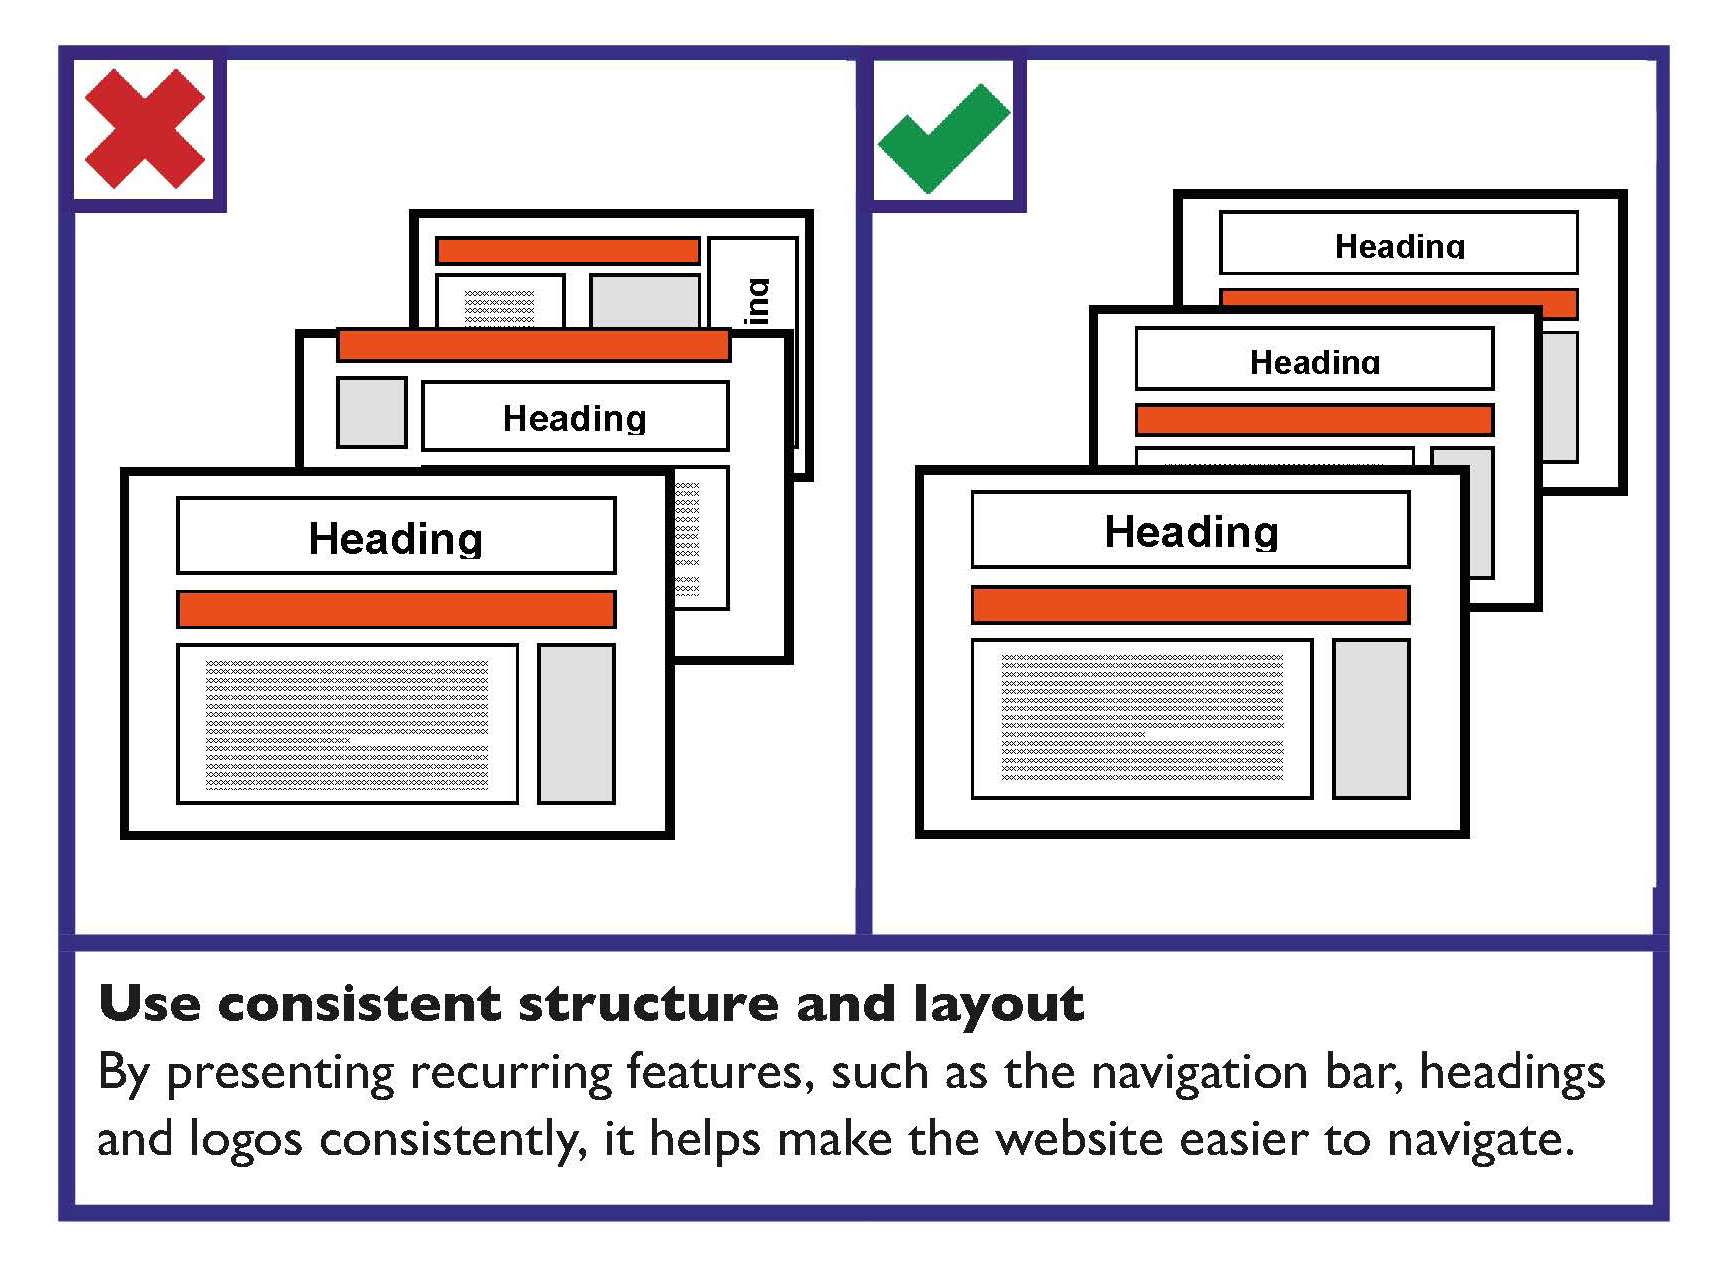 Example of good website design. Use consistent structure and layout. Presenting recurring features such as the navigation bar, headings and logo, consistently helps make the website easier to navigate.